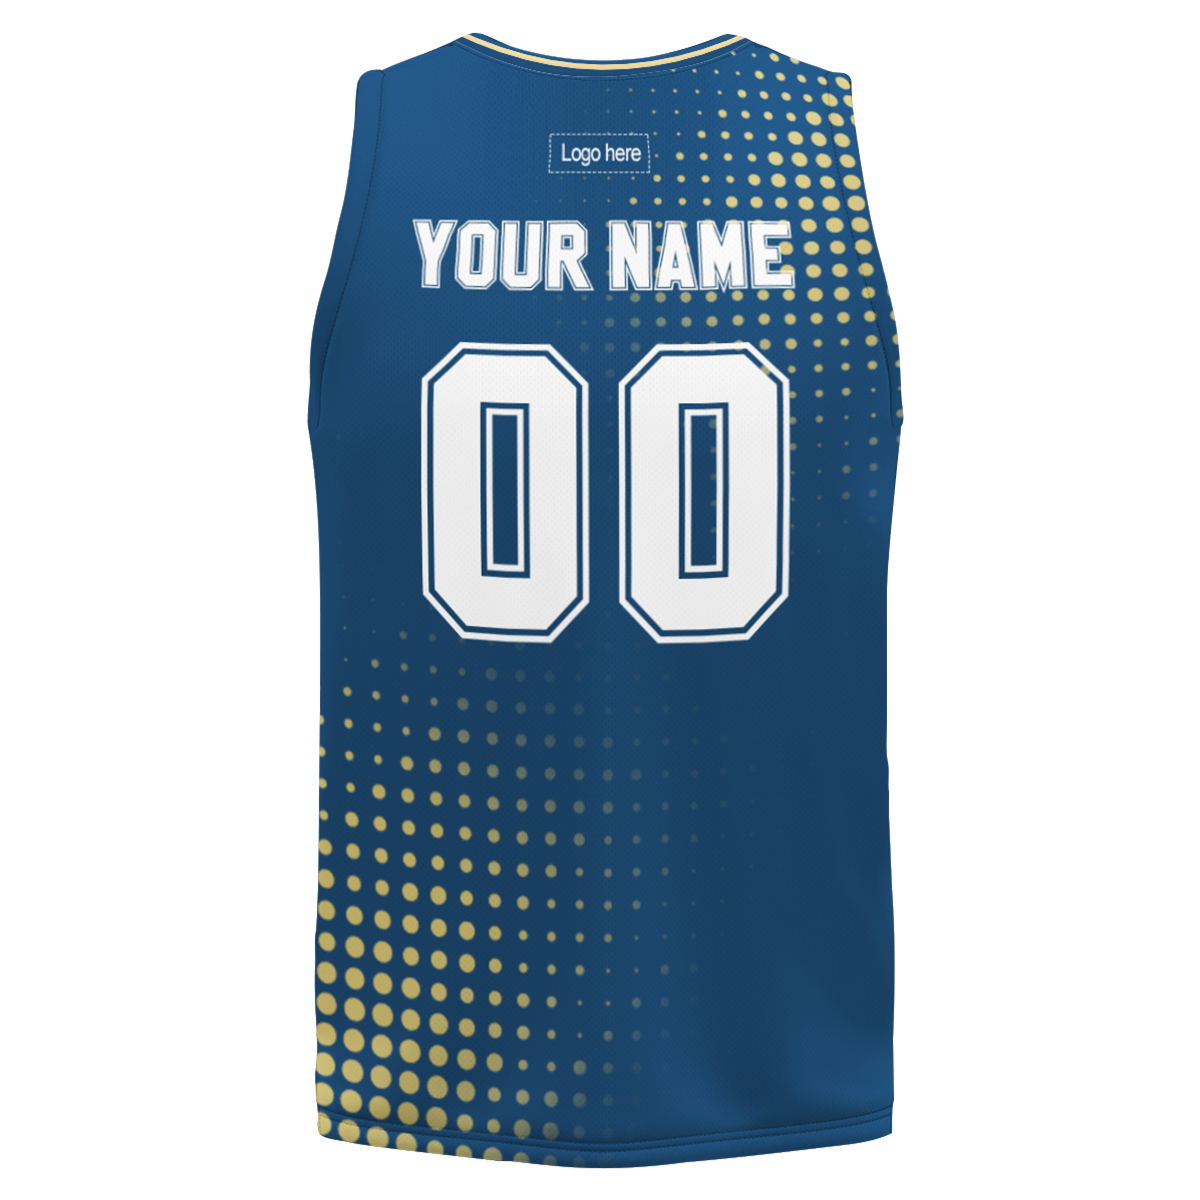 professional-customized-basketball-jersey-uniform-sets-print-on-demand-quick-dry-breathable-basketball-shirt-suits-at-cj-pod-6